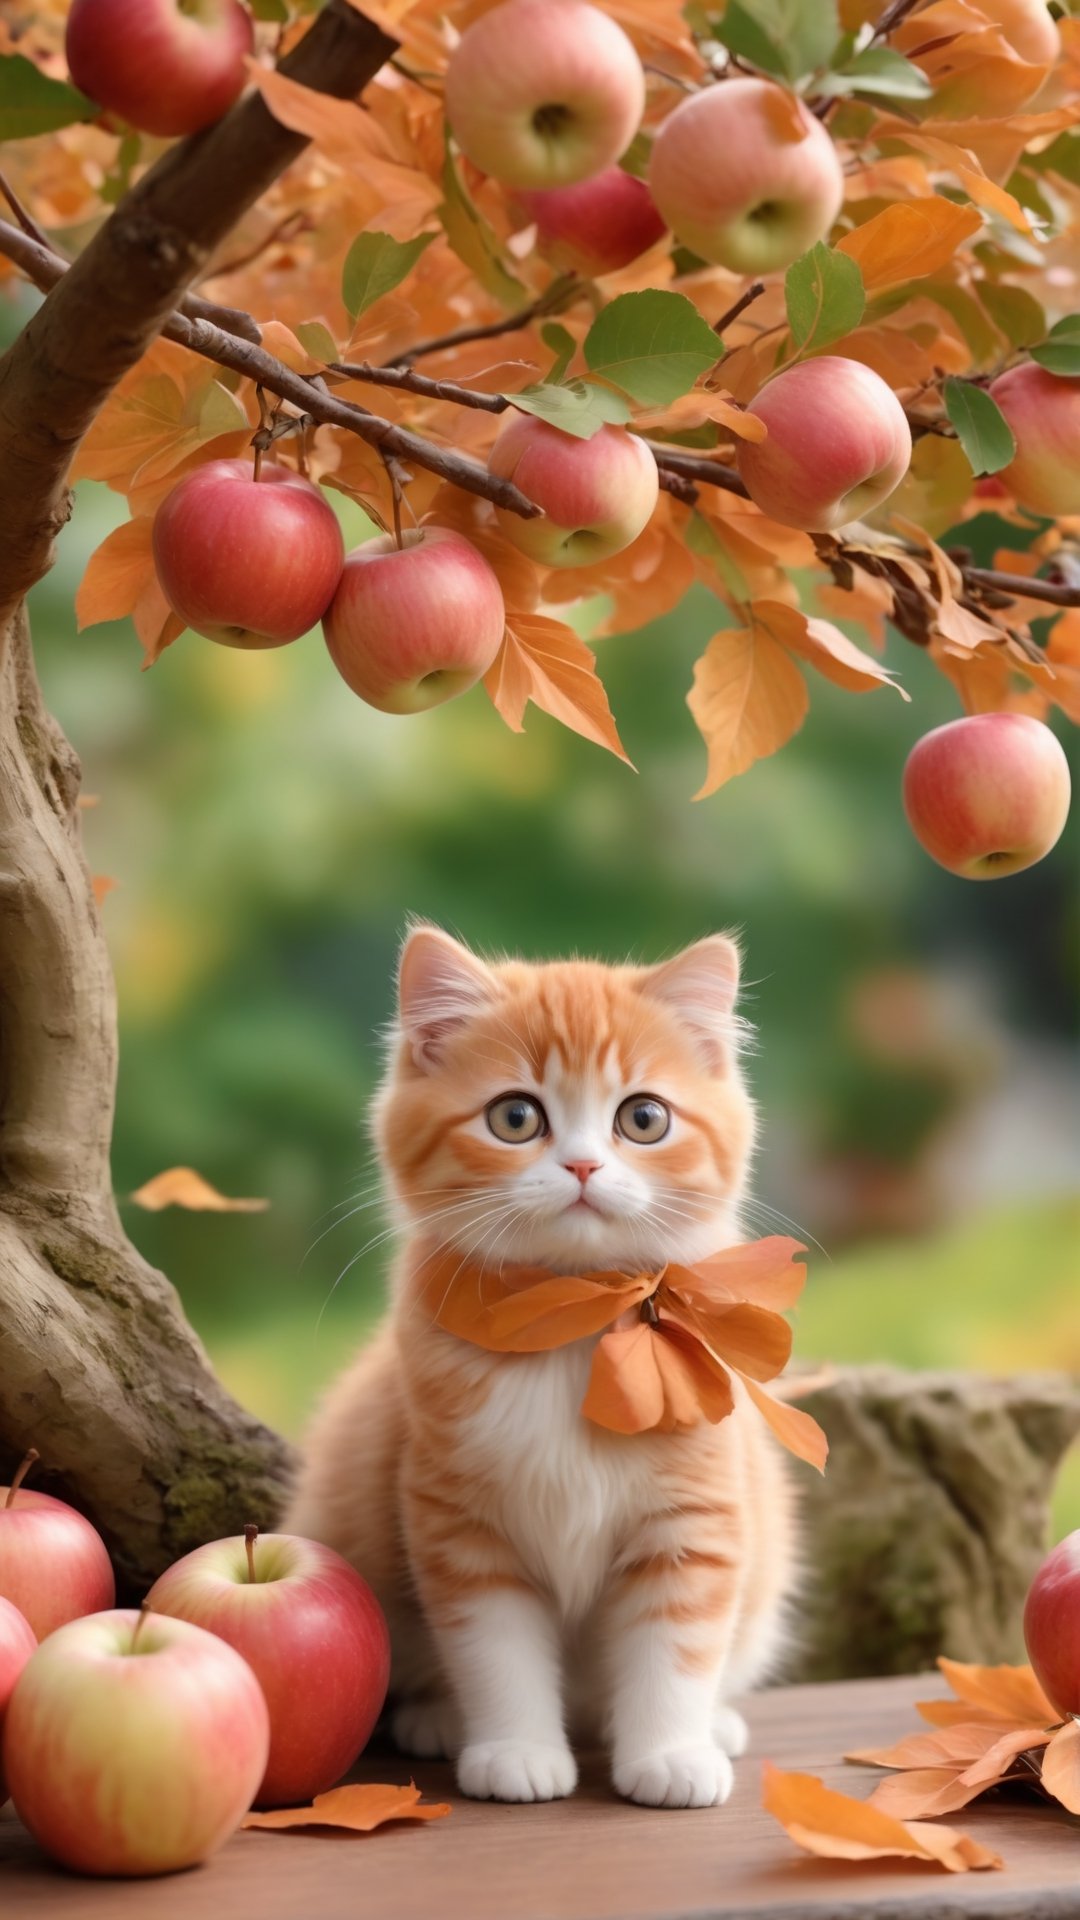  Autumn style, realistic high quality orange tree, apples full the branch, maple leaves falling, Side view shot, Turn around and look ahead, A beautiful big eyes and adorable little girl with two cute little fluffy fat fat kittens walking on the apples tree branch from the treeand street, smiled happily,big eyes so cute and beautiful, under the tree have a table, and apples and beautiful flowers, maple leaves falling, orange near flowers, Turn around and look viewers , pink flowers blooming fantastic amazing and romantic lighting bokeh, pink flowers blooming realistic and green plants amazing tale and lighting as background, Xxmix_Catecat